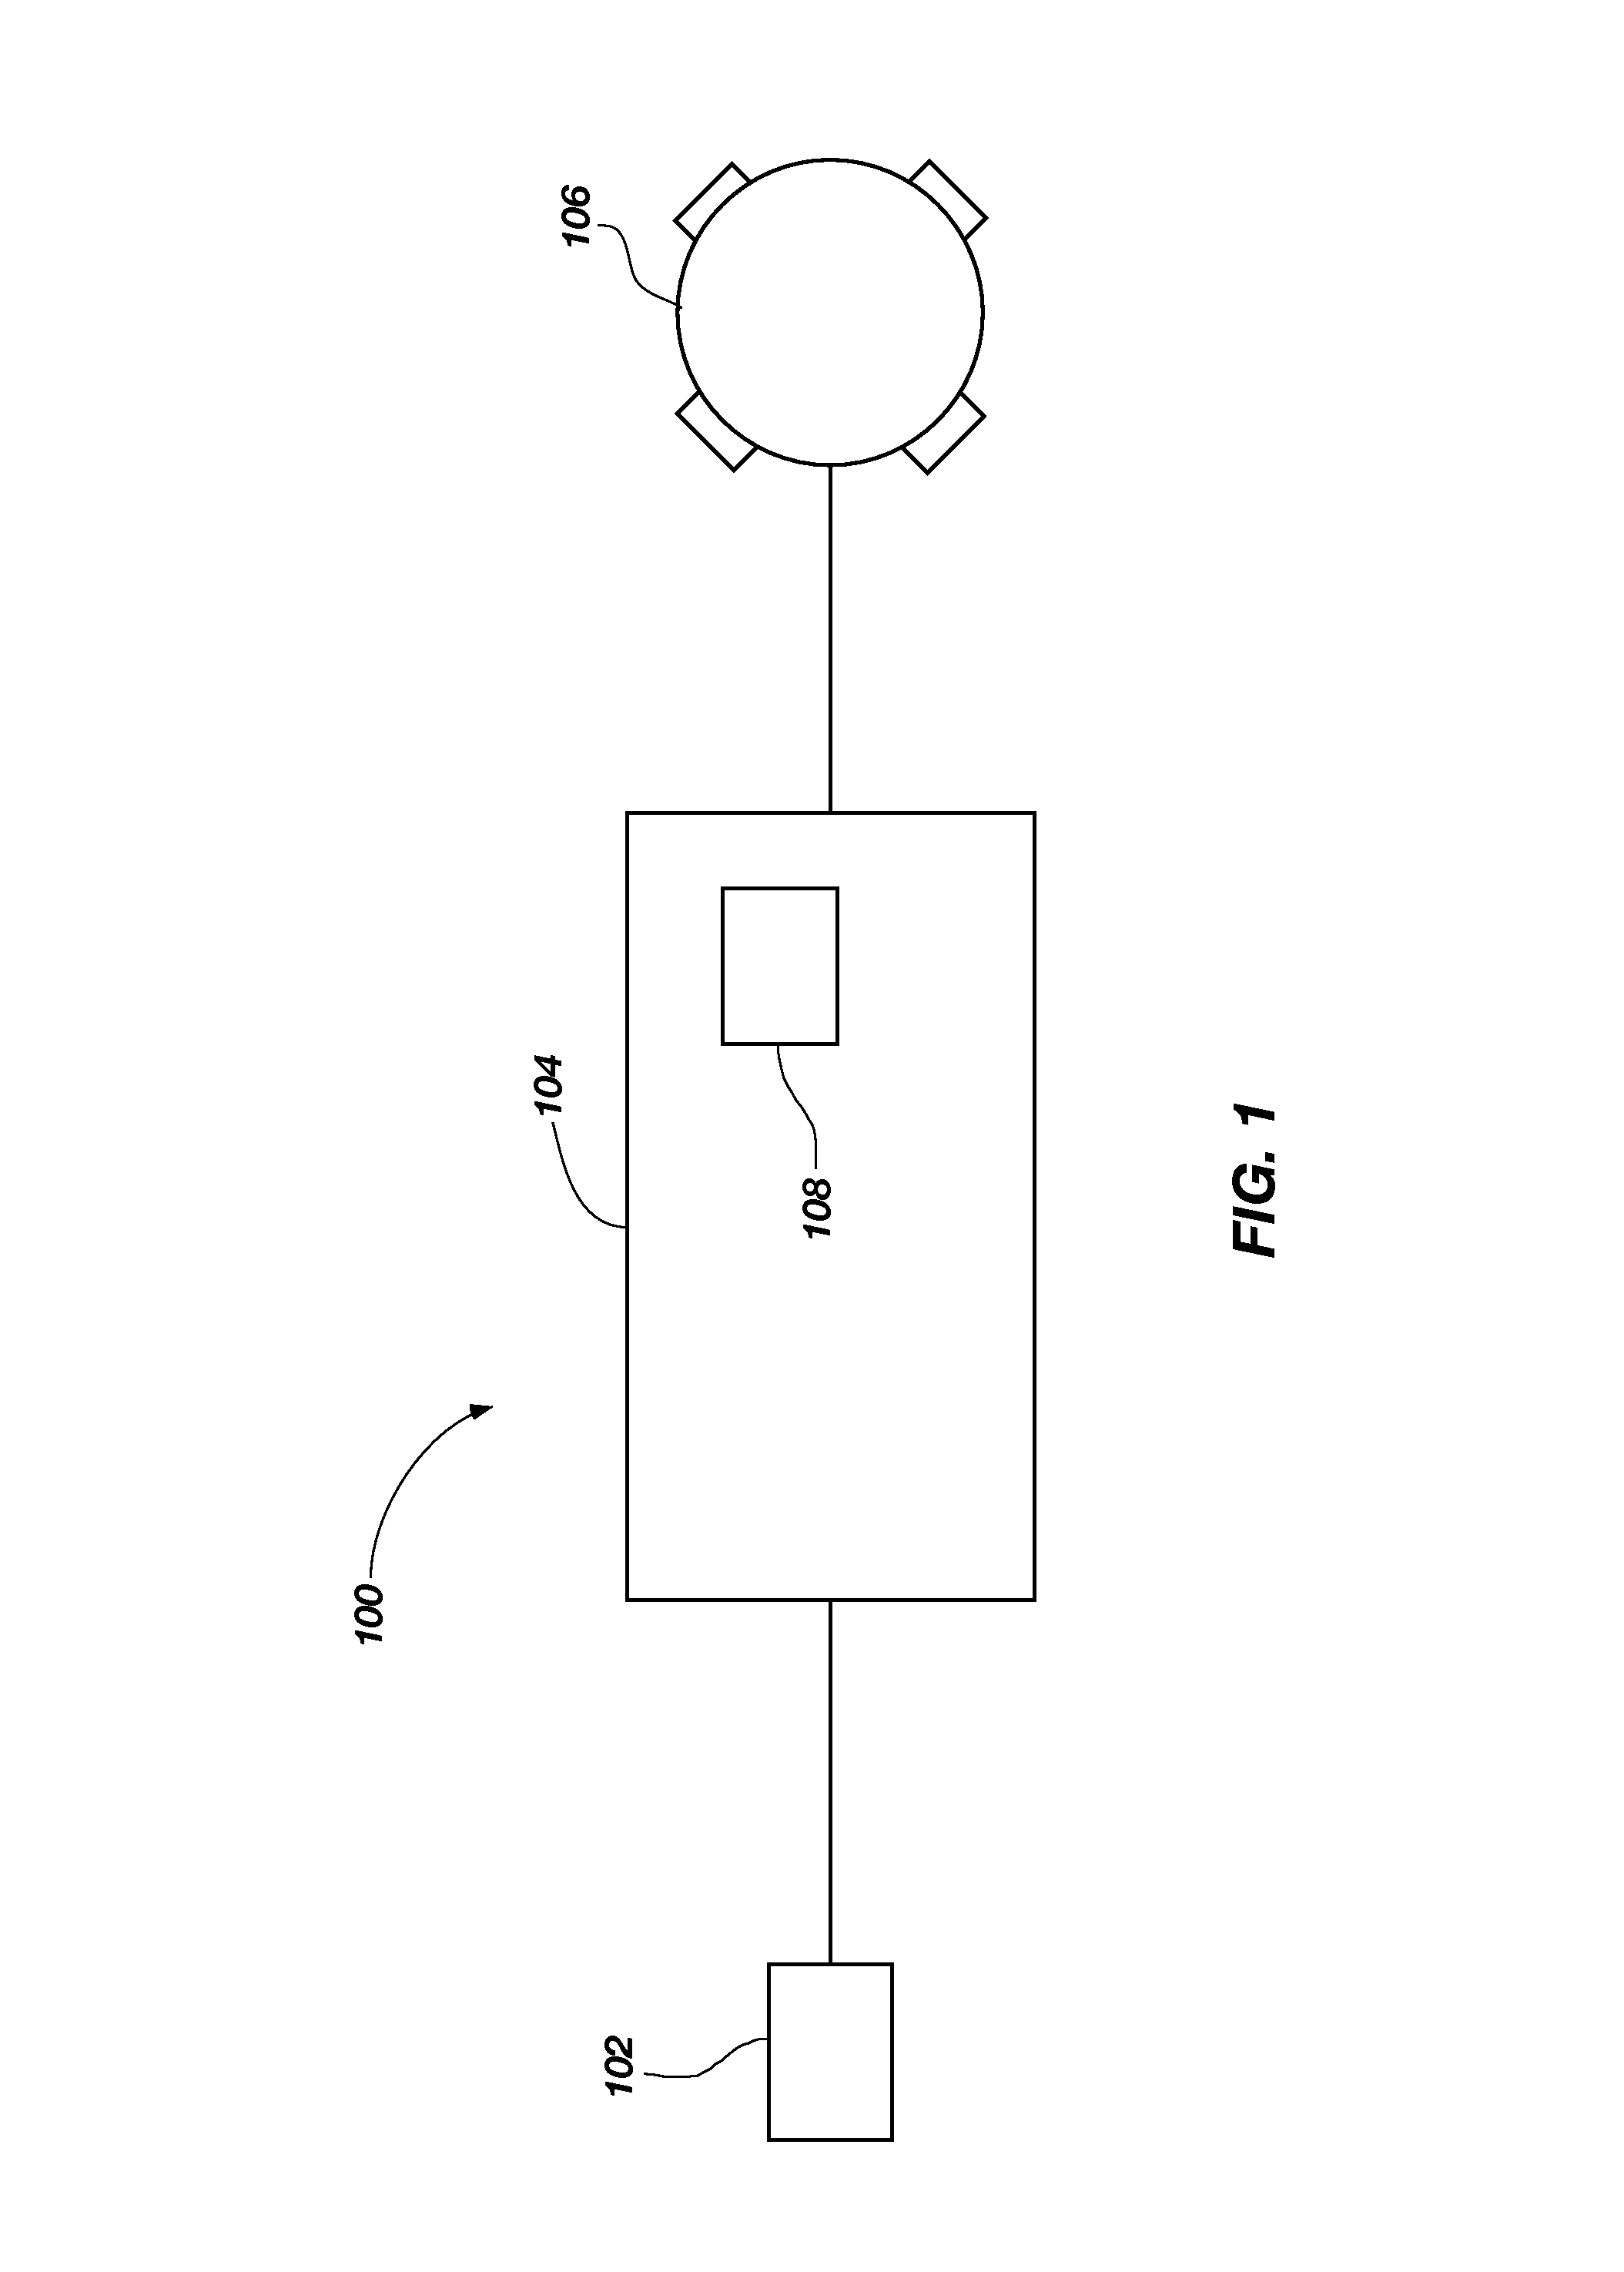 Methods and systems relating to overcurrent circuit protection